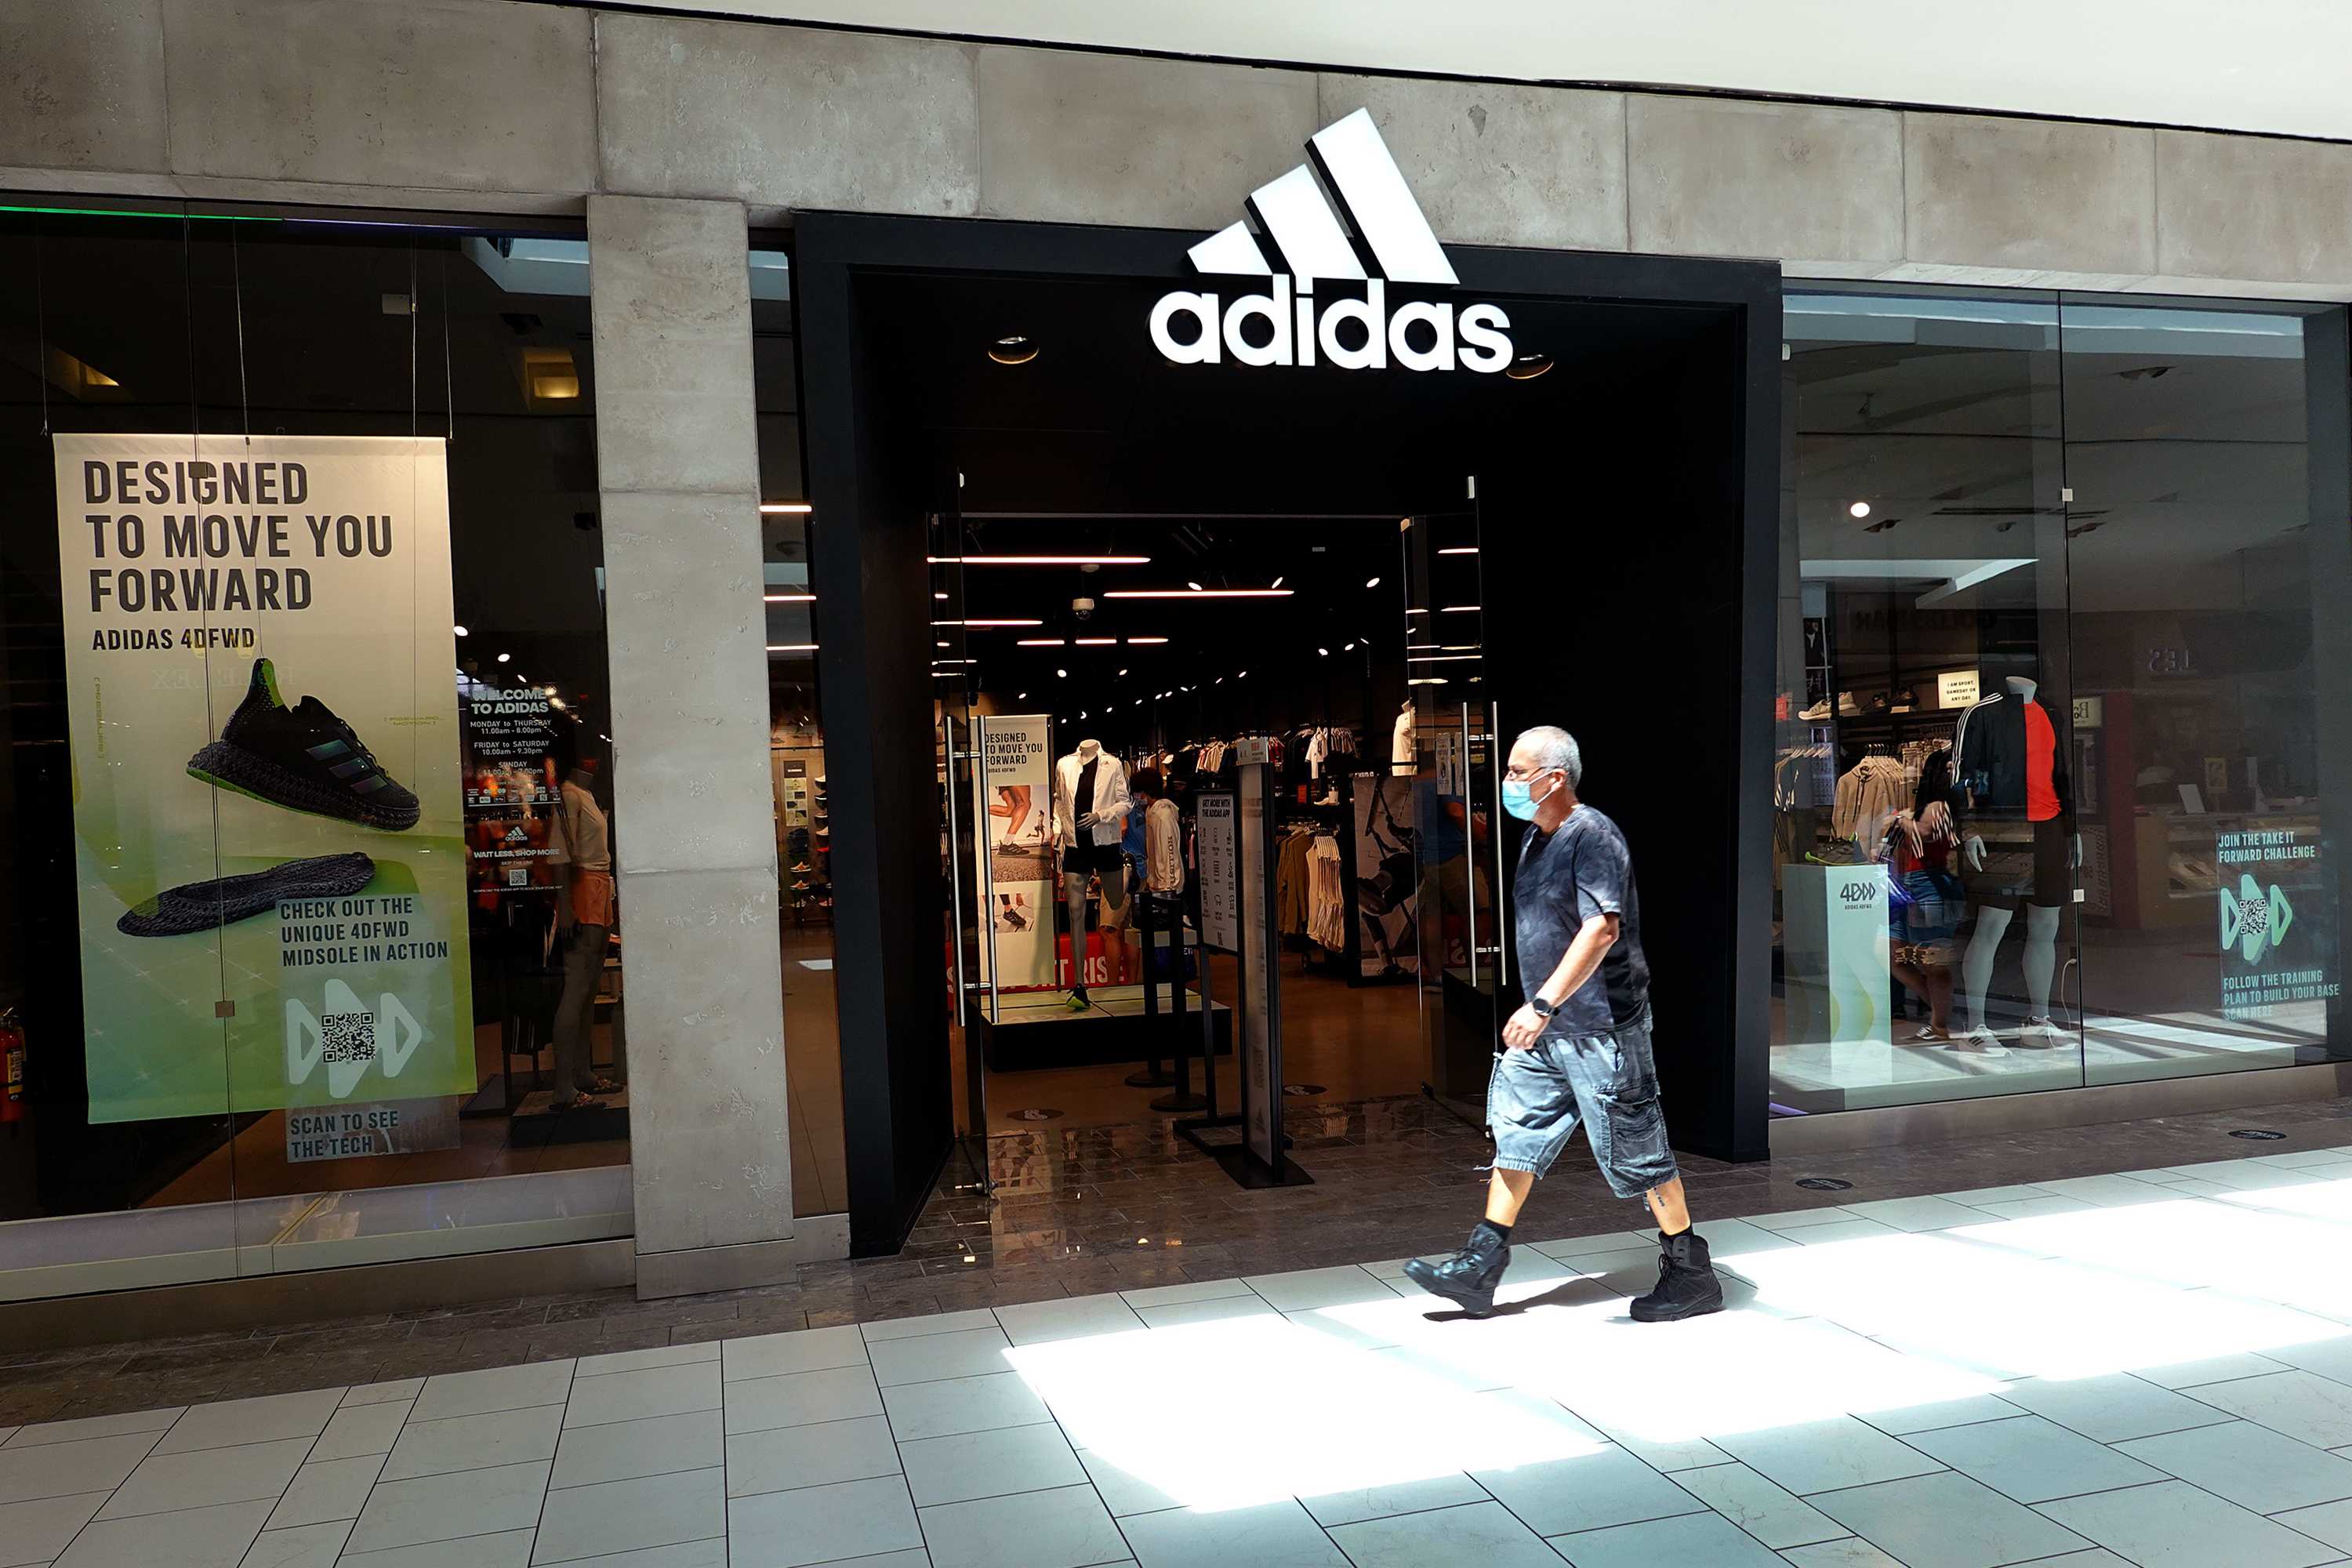 adidas factory outlet online